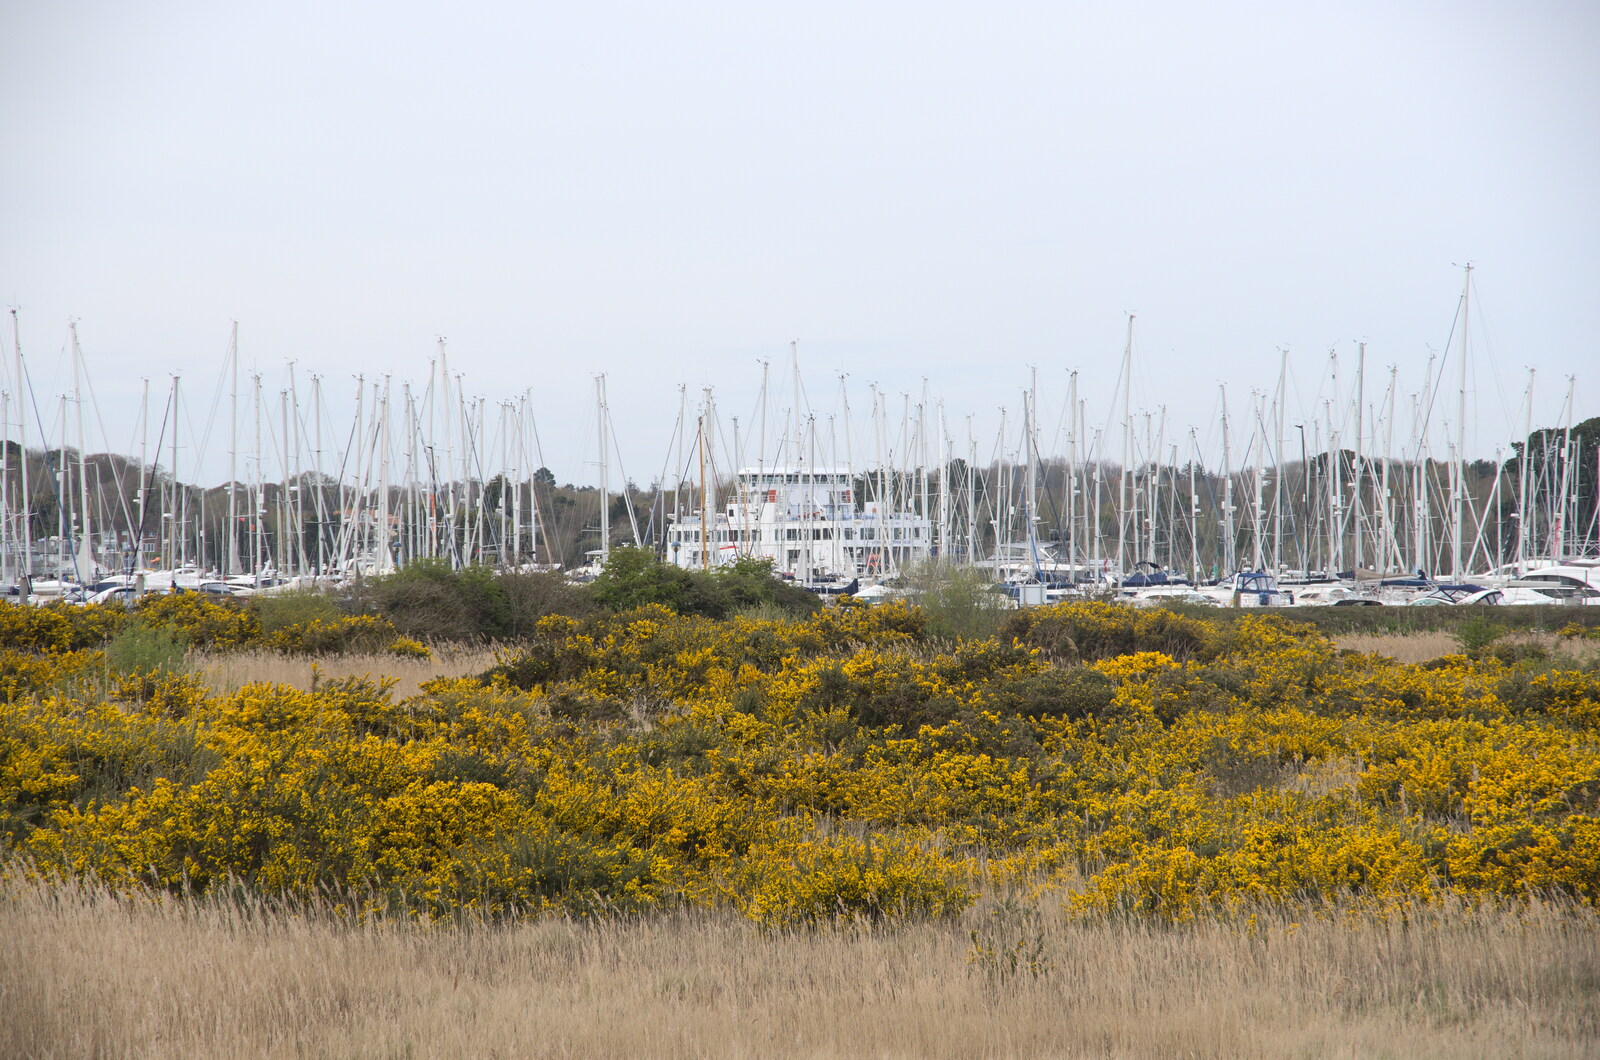 Bernice's Birthday and Walks Around New Milton and Lymington, Hampshire - 10th April 2022: The Isle of Wight ferry behind a forest of masts